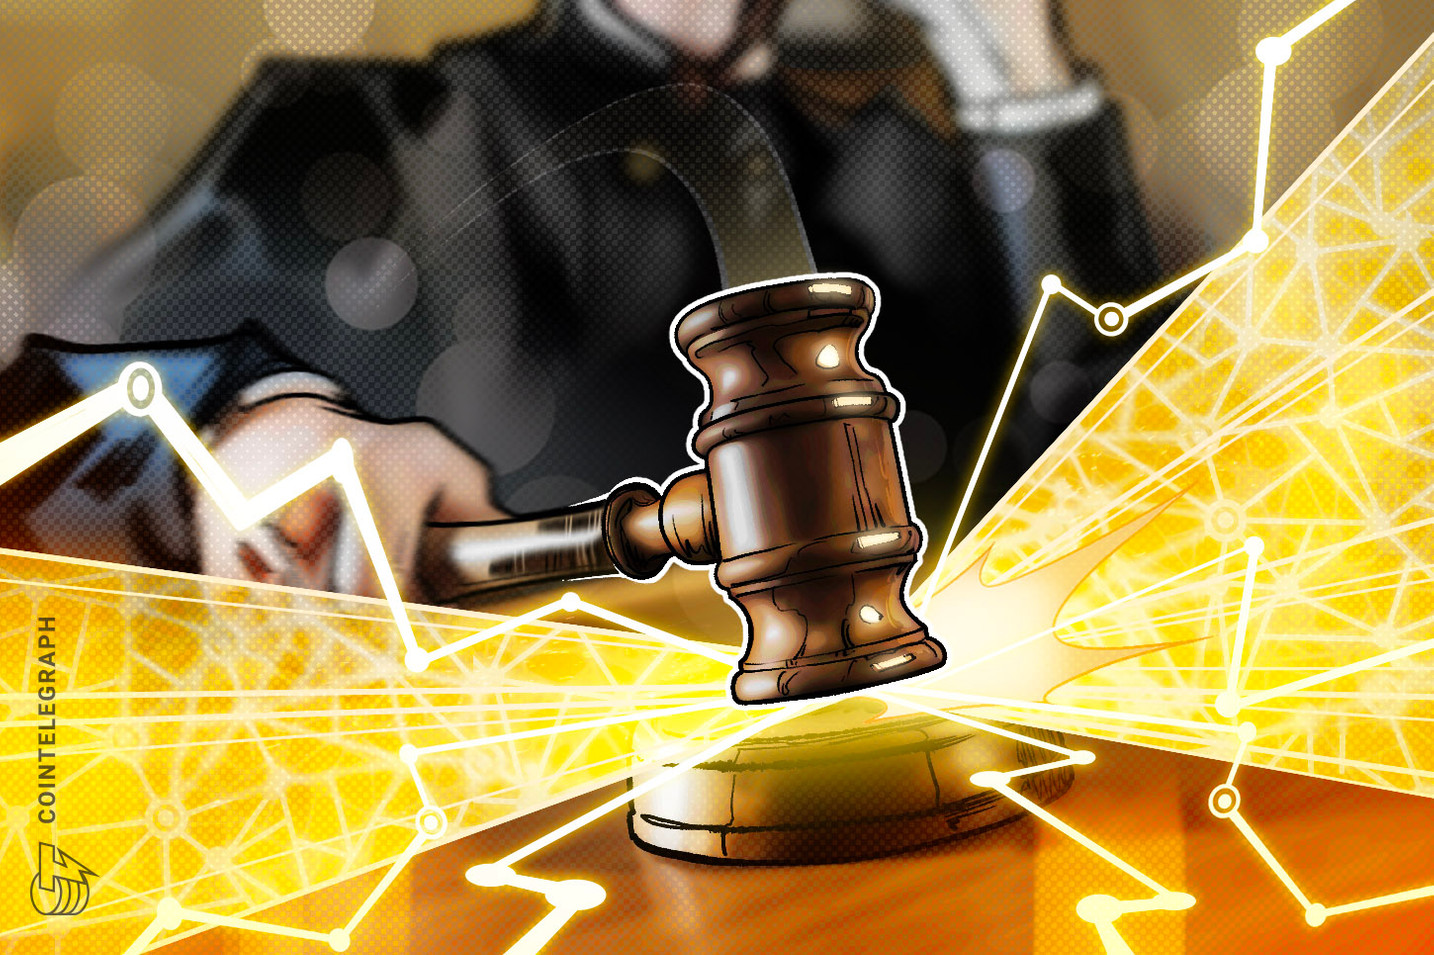 Crypto.com petitions US court to uphold arbitration decision for mistakenly sent $50K